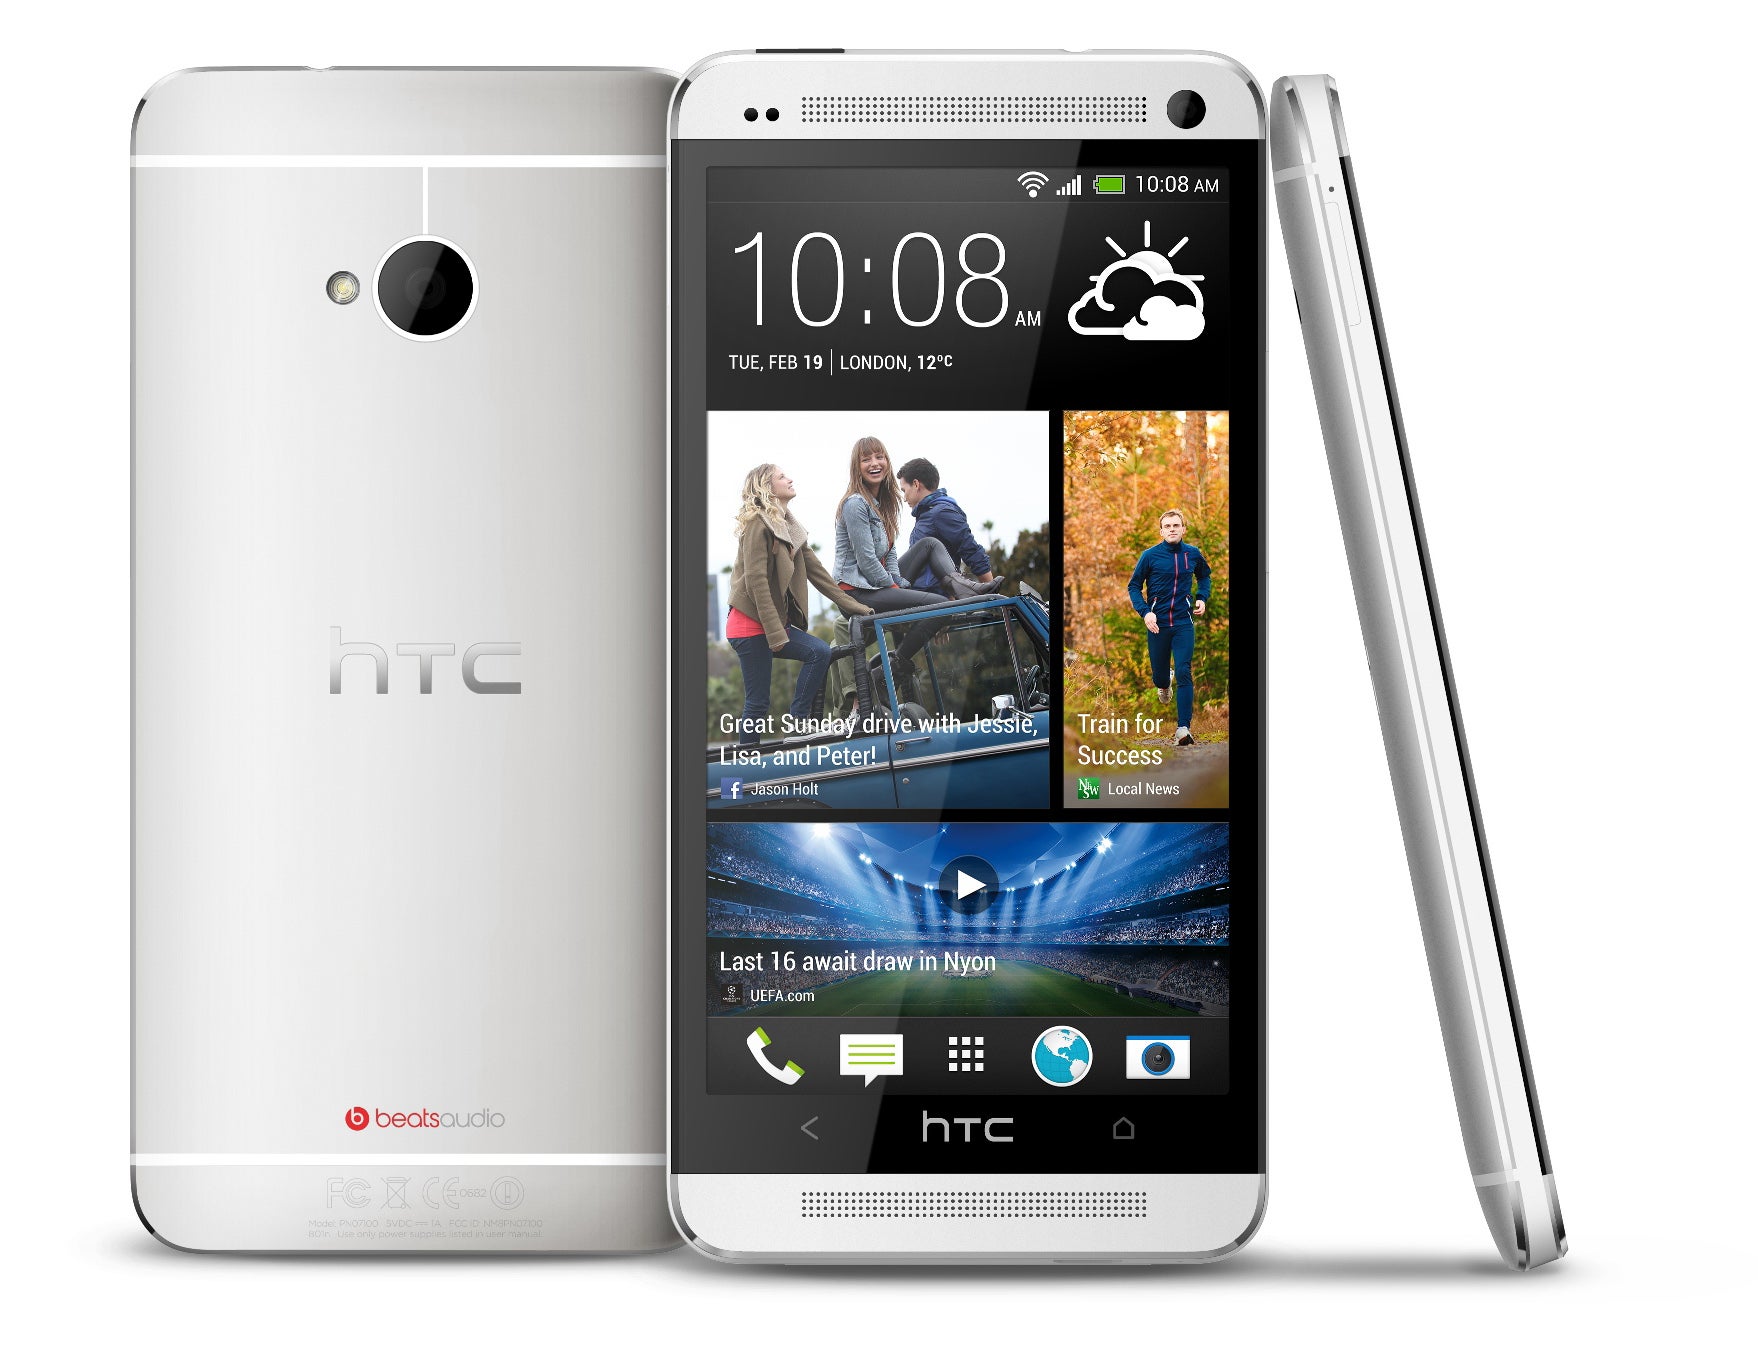 Will the HTC One beat out the Samsung Galaxy S4? - Pre-registration for HTC One in the U.S. reaches several hundred thousand